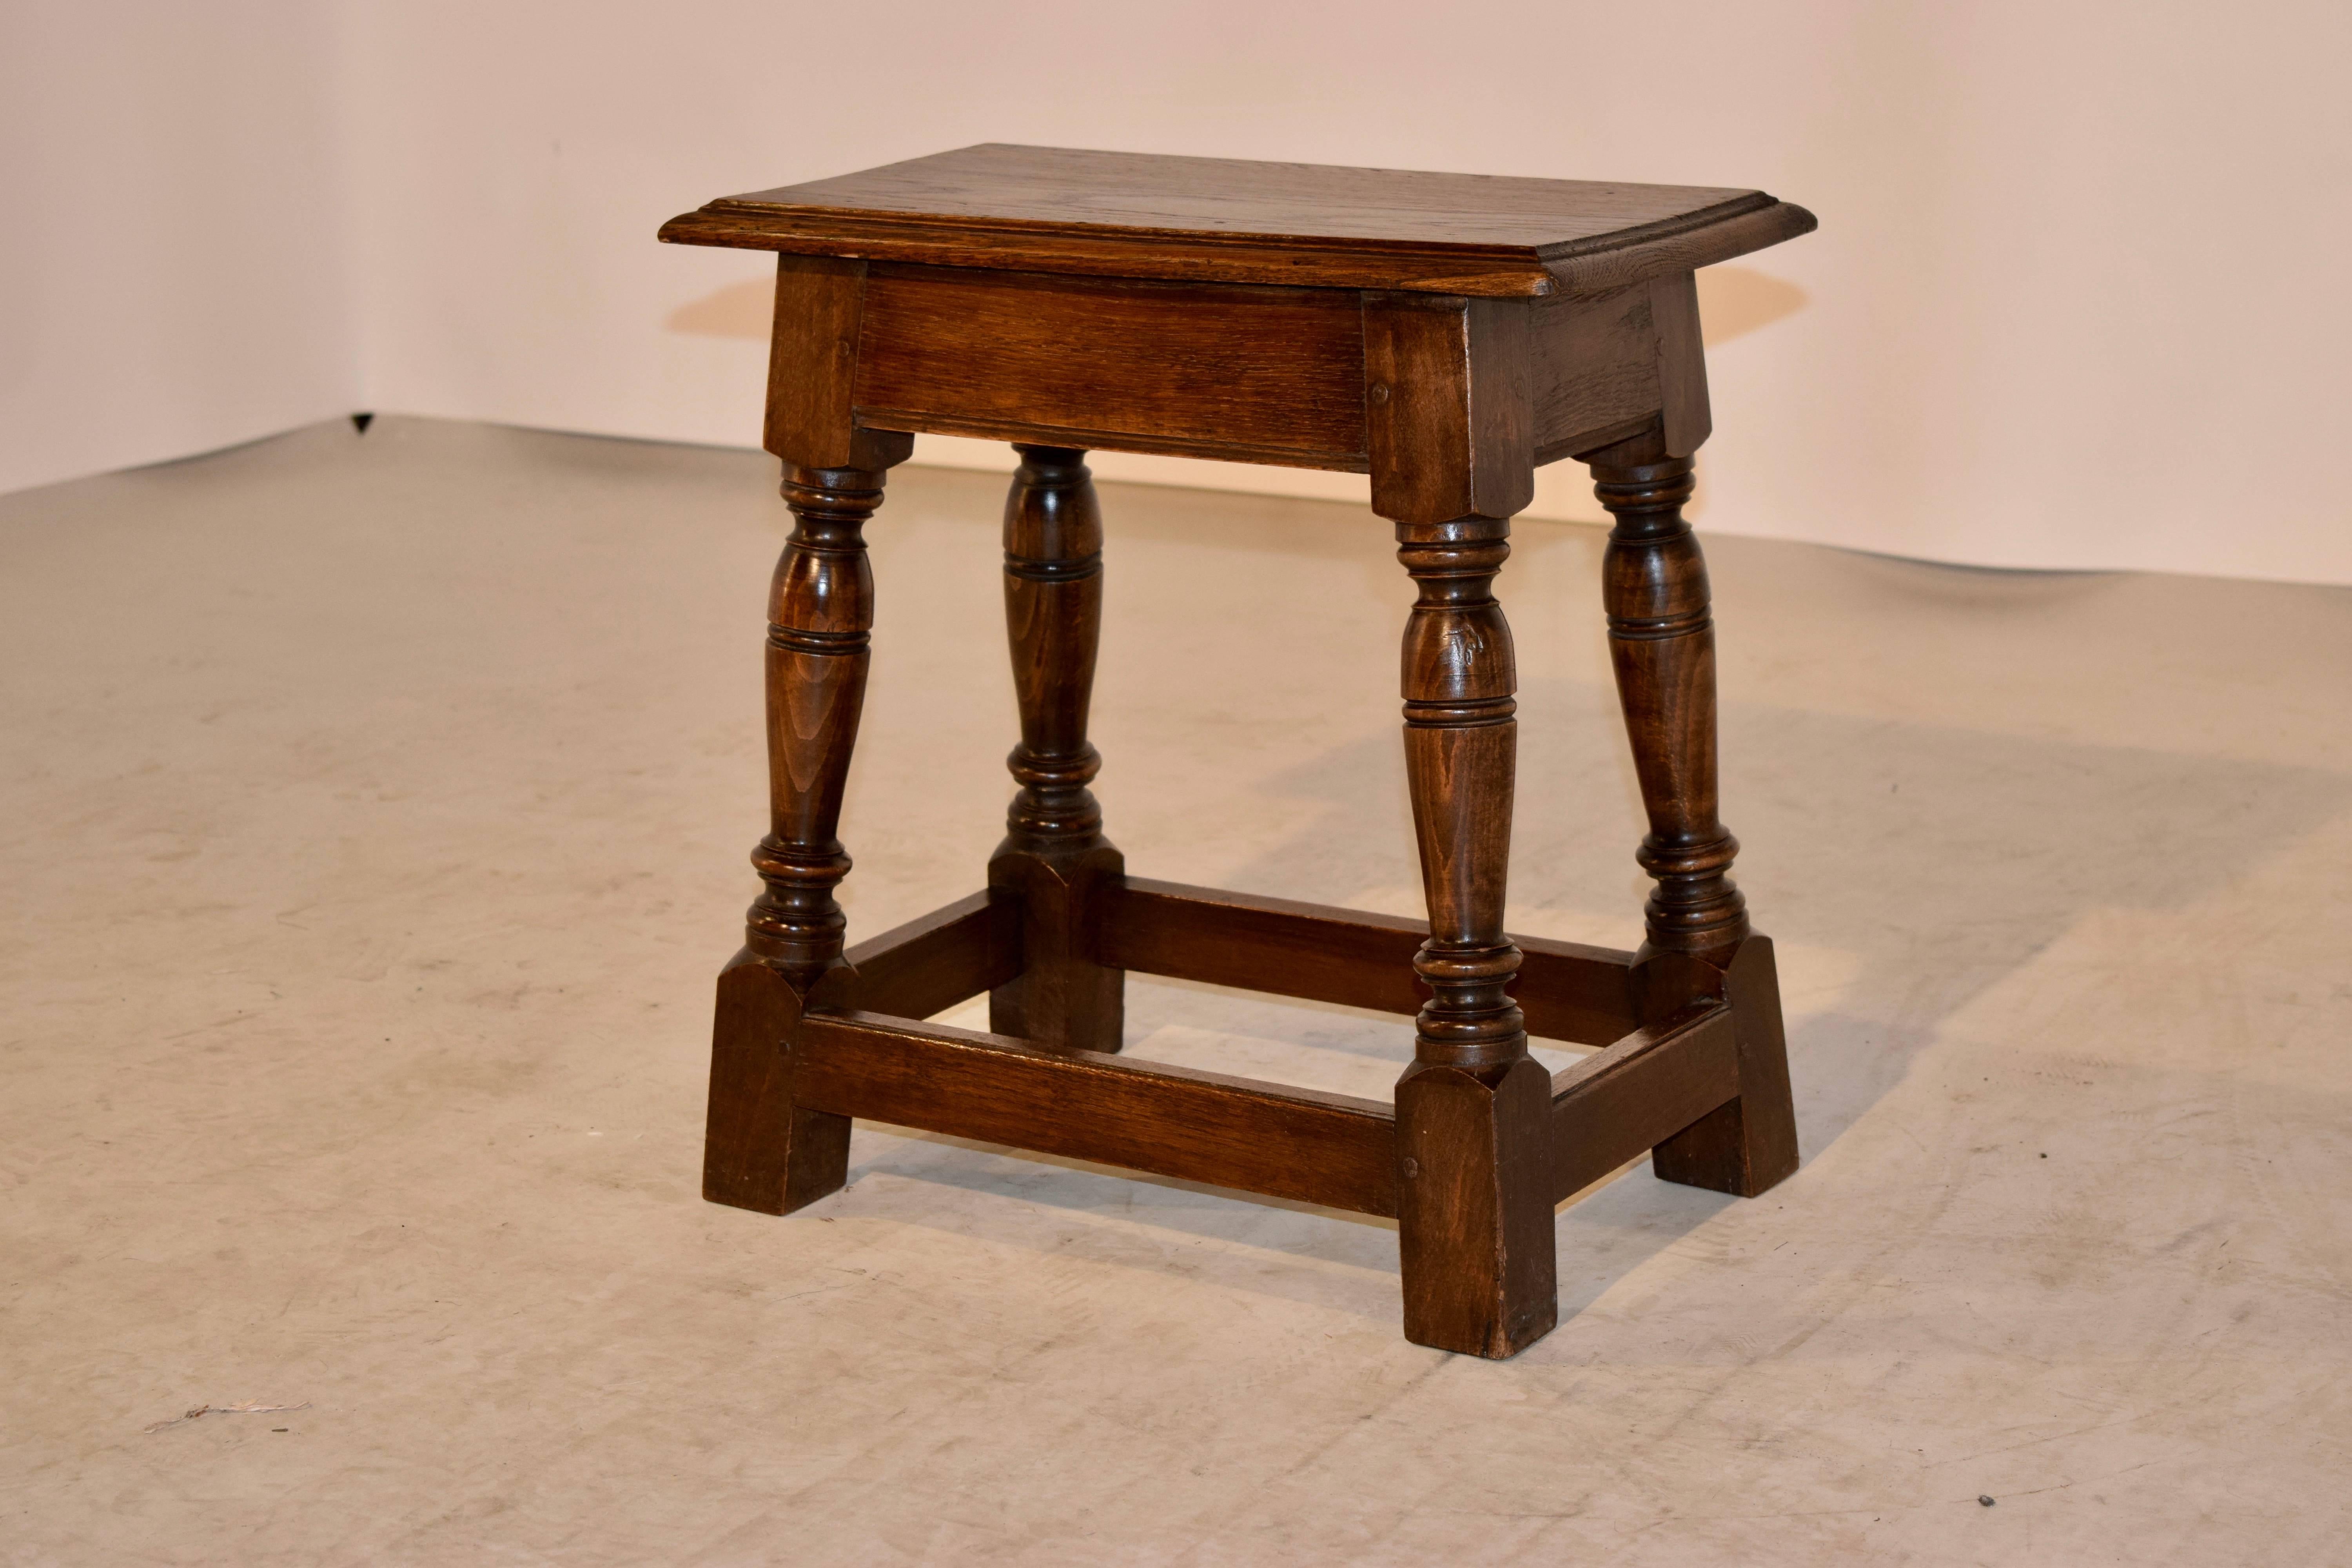 19th century English oak joint stool with a molded and beveled edge around the top, following down to a simple apron and hand-turned splayed legs, joined by simple stretchers.